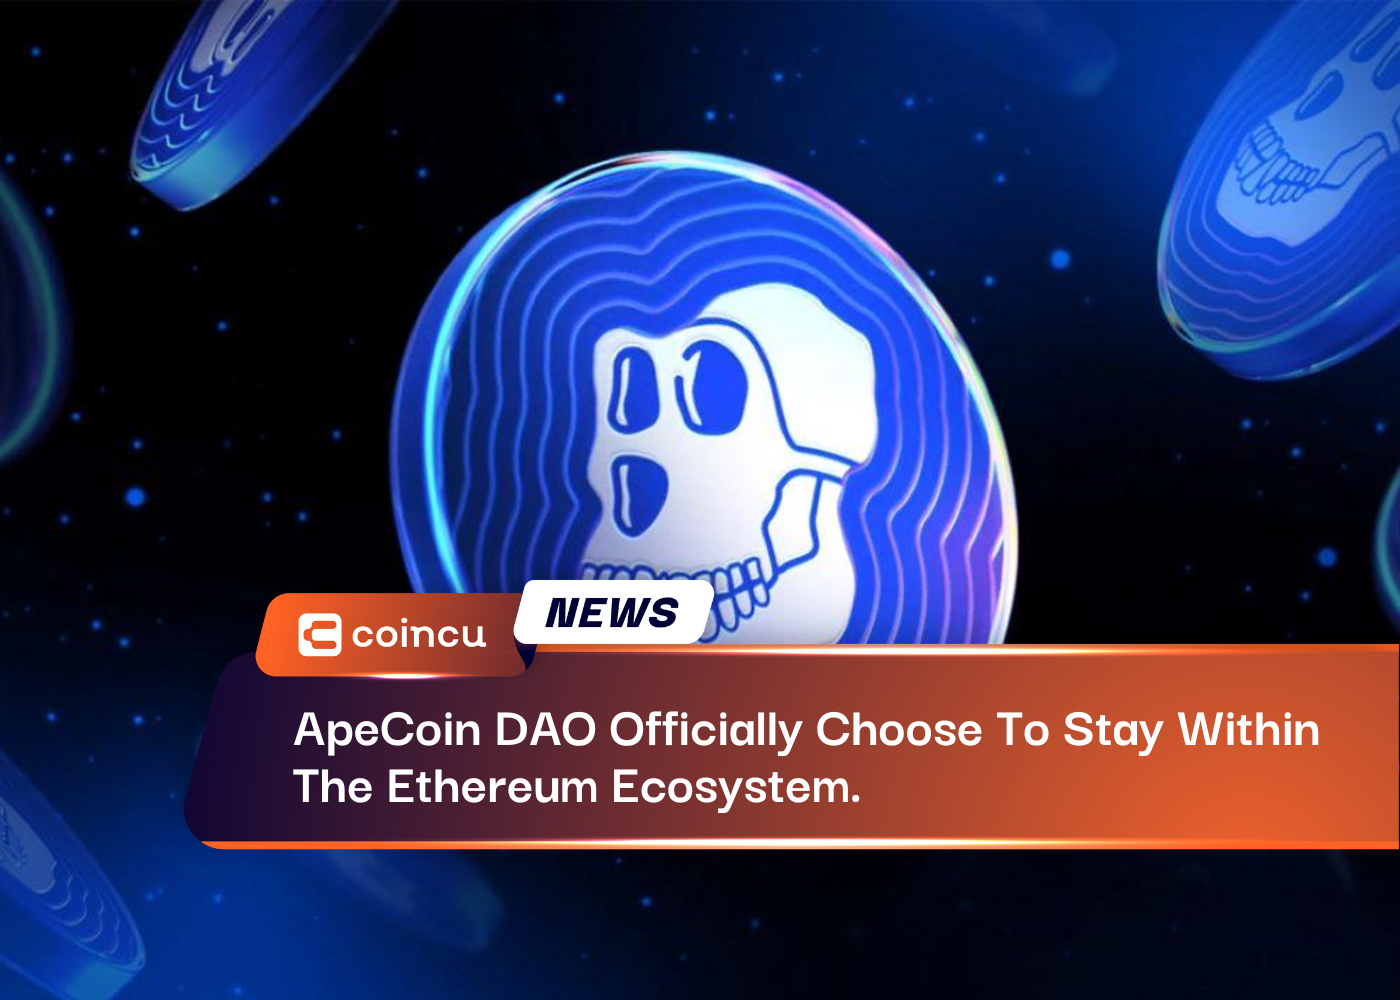 ApeCoin DAO Officially Choose To Stay Within The Ethereum Ecosystem.